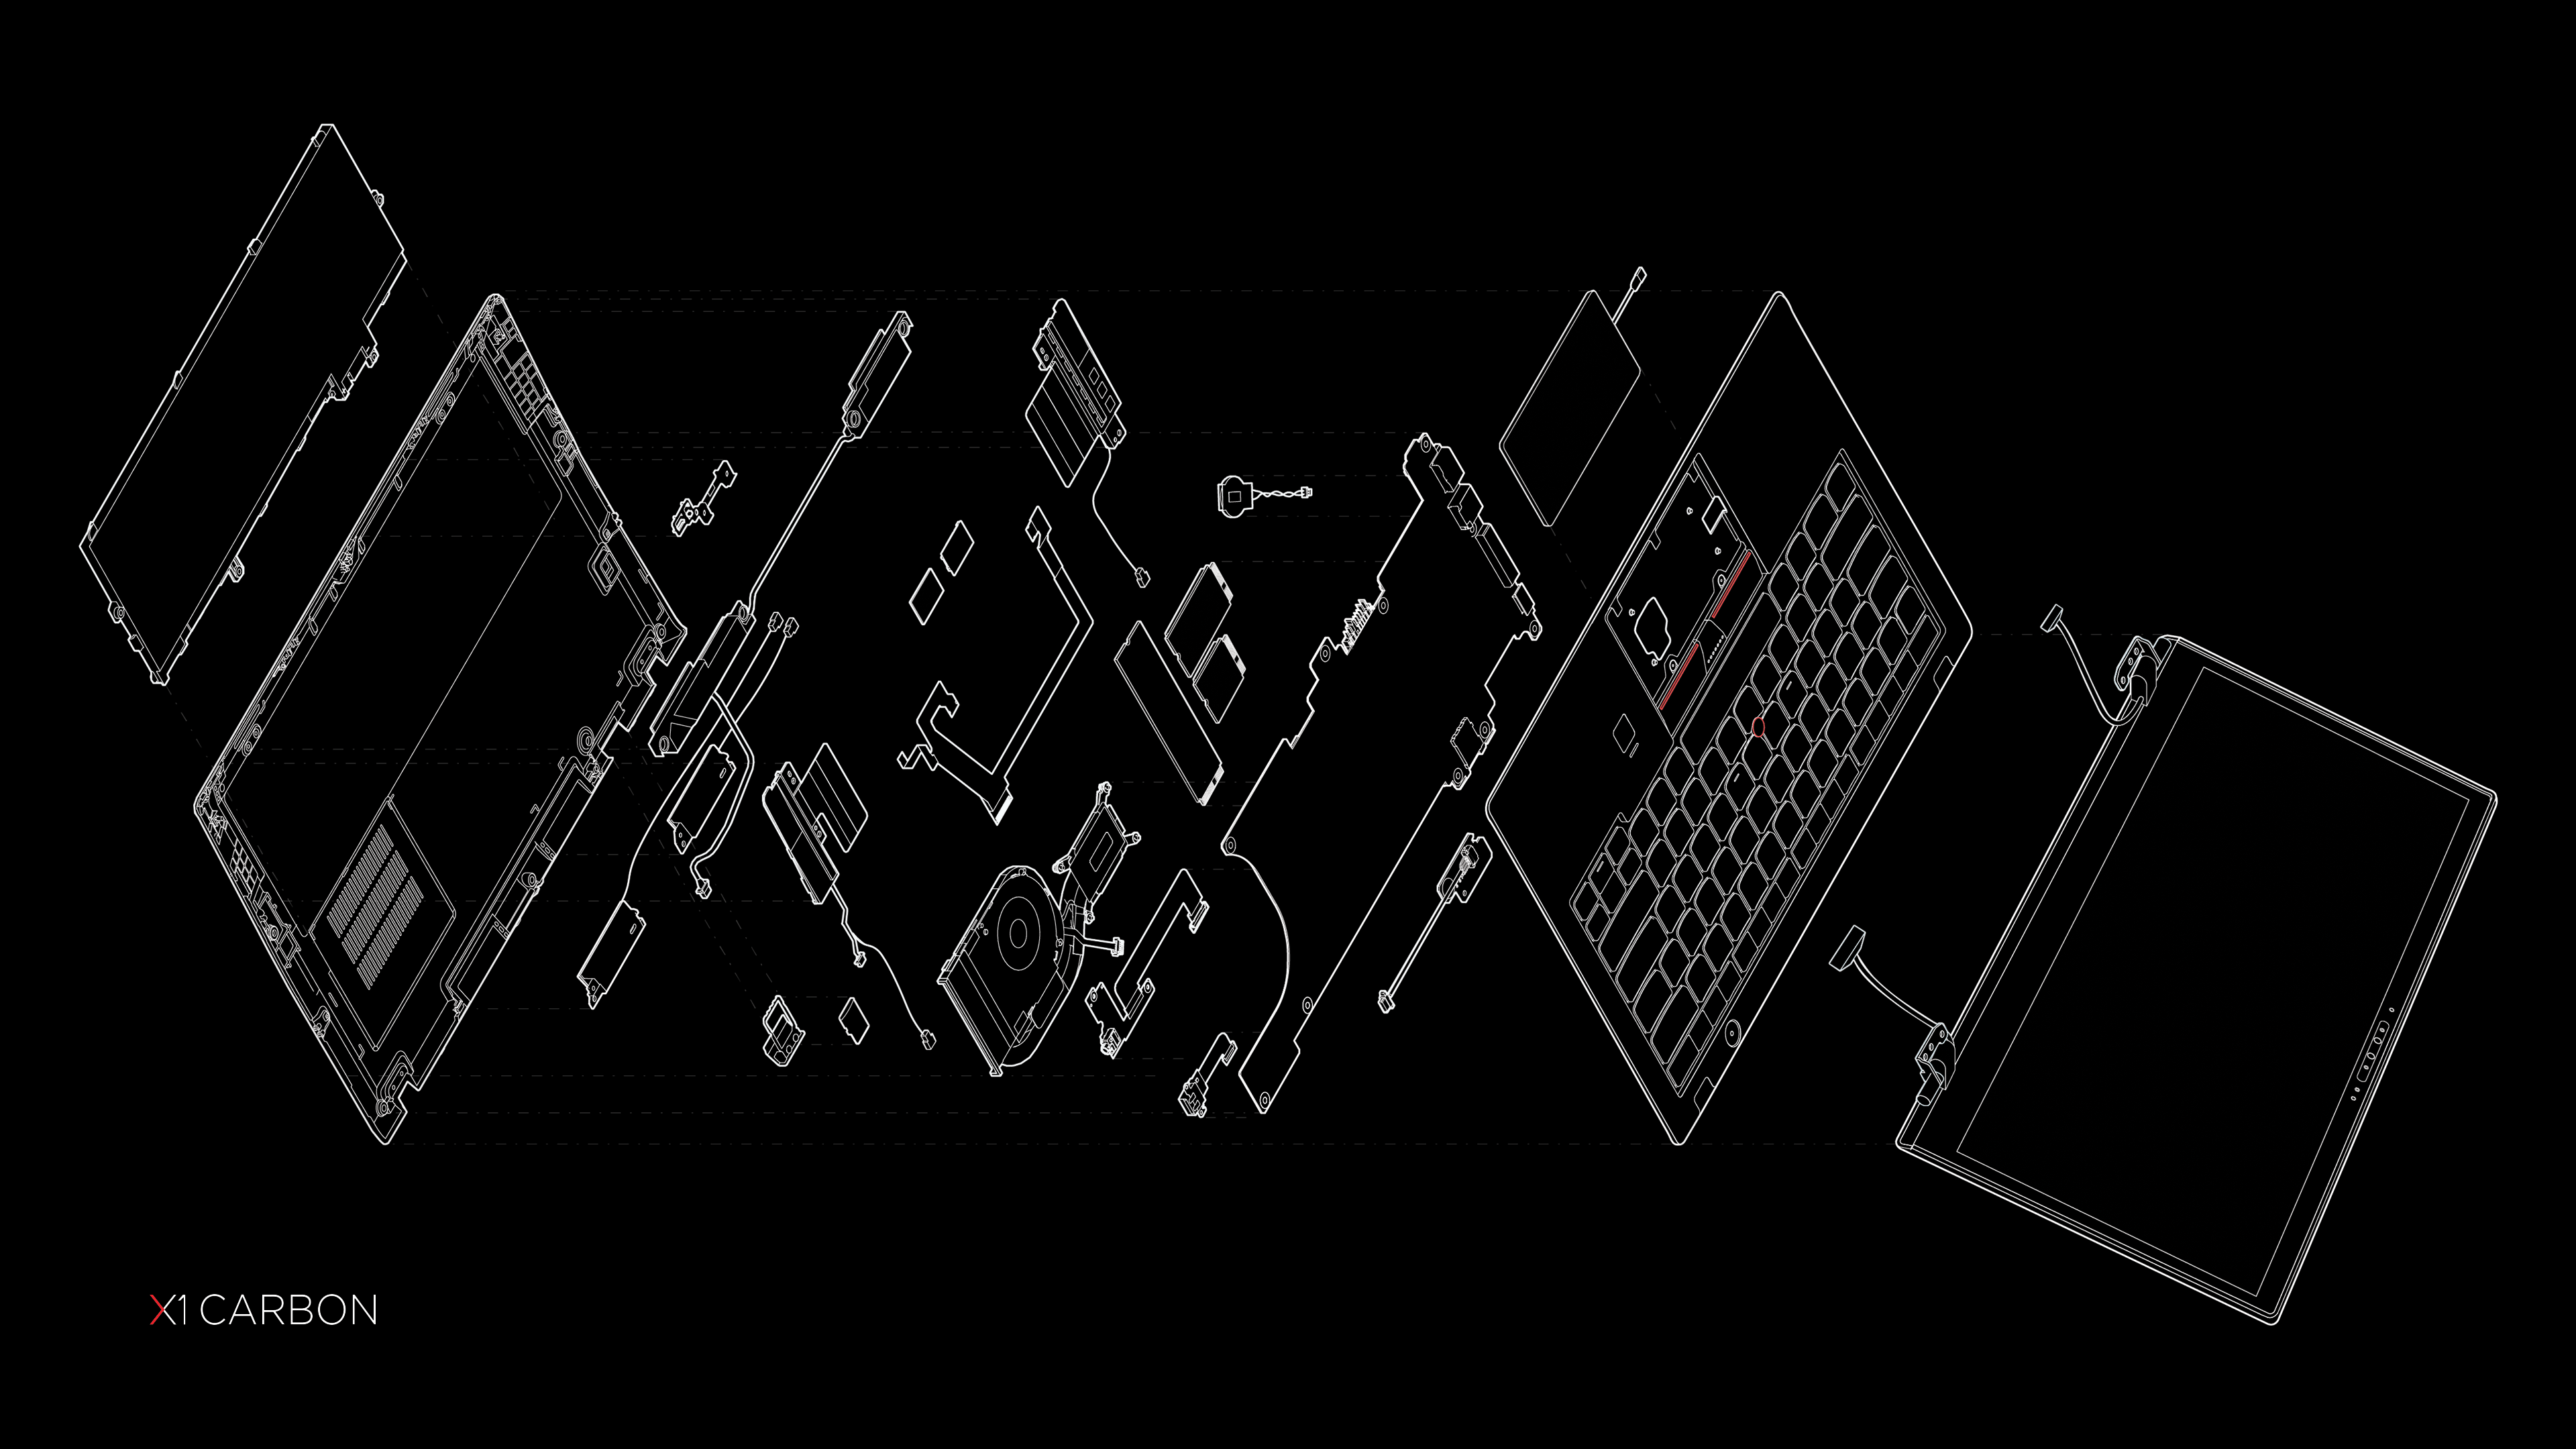 ThinkPad X1 Carbon Wallpapers - Wallpaper Cave